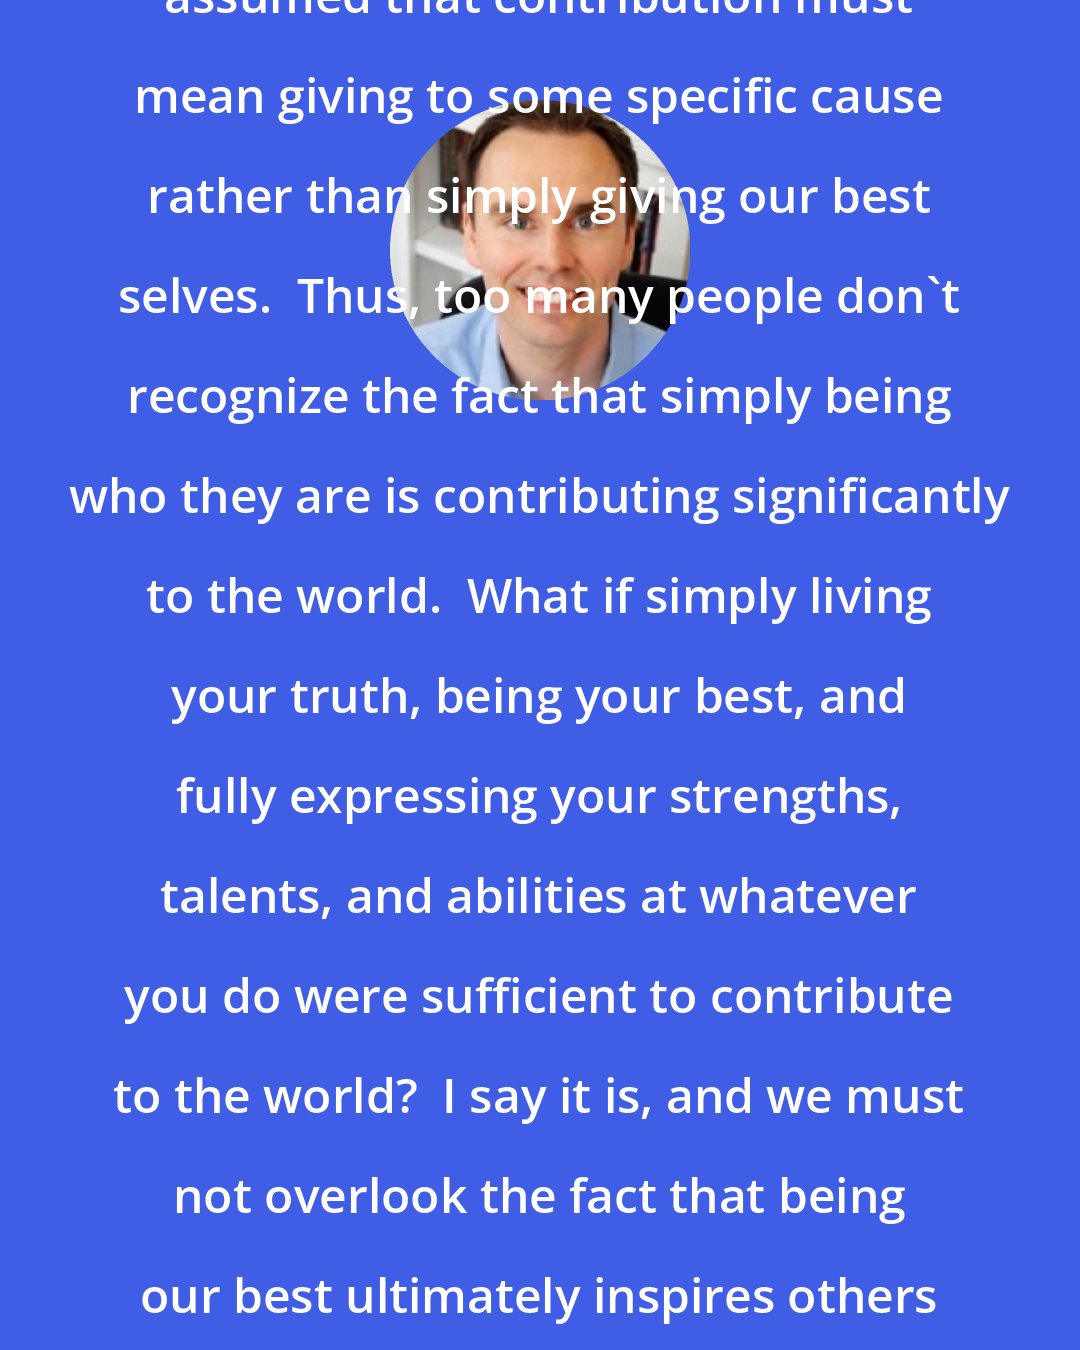 Brendon Burchard: Ours is a society that has falsely assumed that contribution must mean giving to some specific cause rather than simply giving our best selves.  Thus, too many people don't recognize the fact that simply being who they are is contributing significantly to the world.  What if simply living your truth, being your best, and fully expressing your strengths, talents, and abilities at whatever you do were sufficient to contribute to the world?  I say it is, and we must not overlook the fact that being our best ultimately inspires others and can and does indeed make an impact.